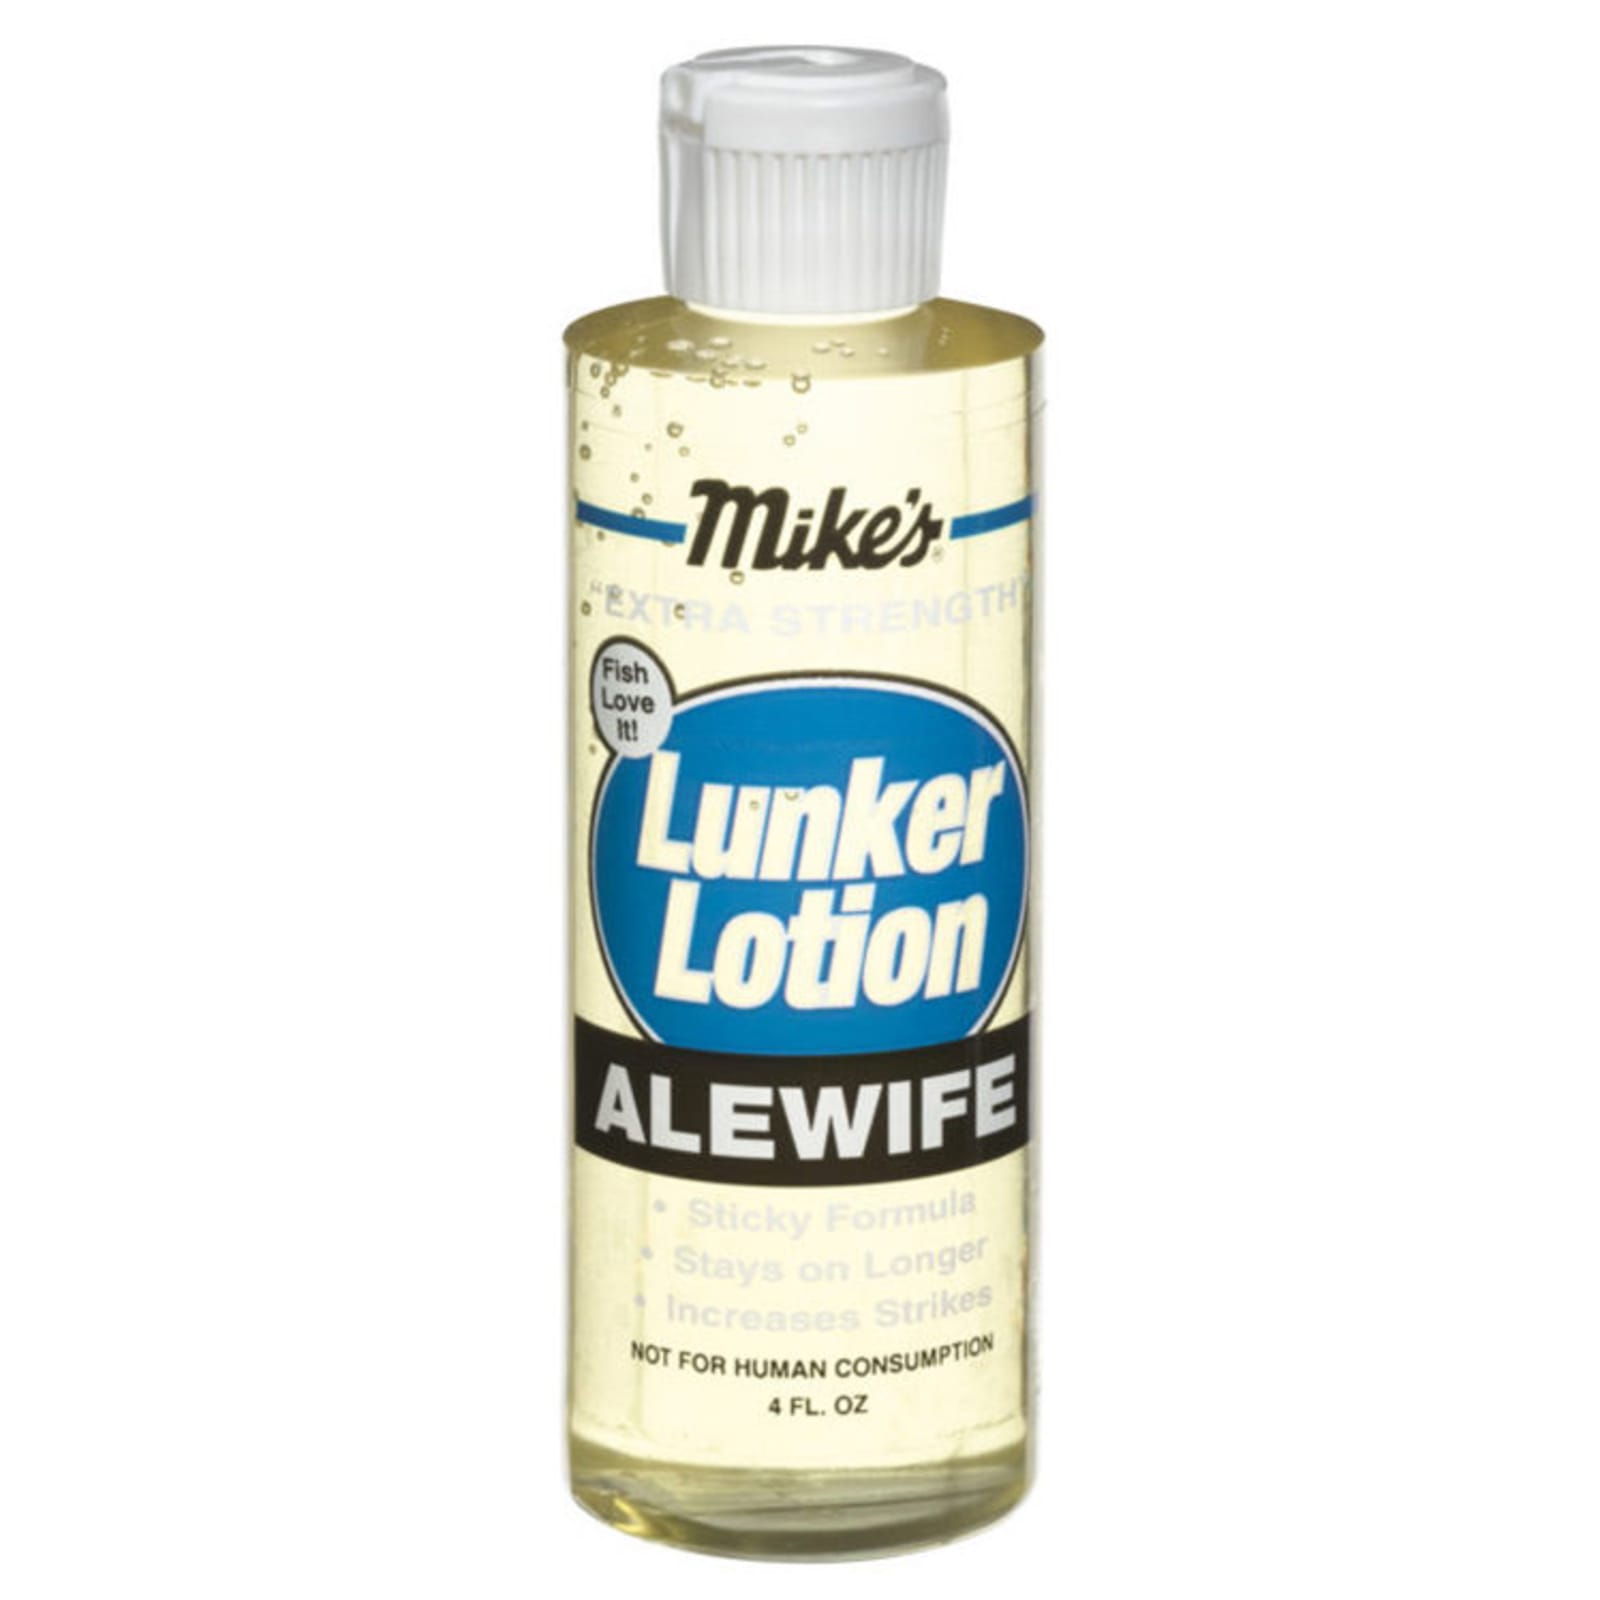 Lunker Lotion - Alewife by Atlas-Mike's at Fleet Farm